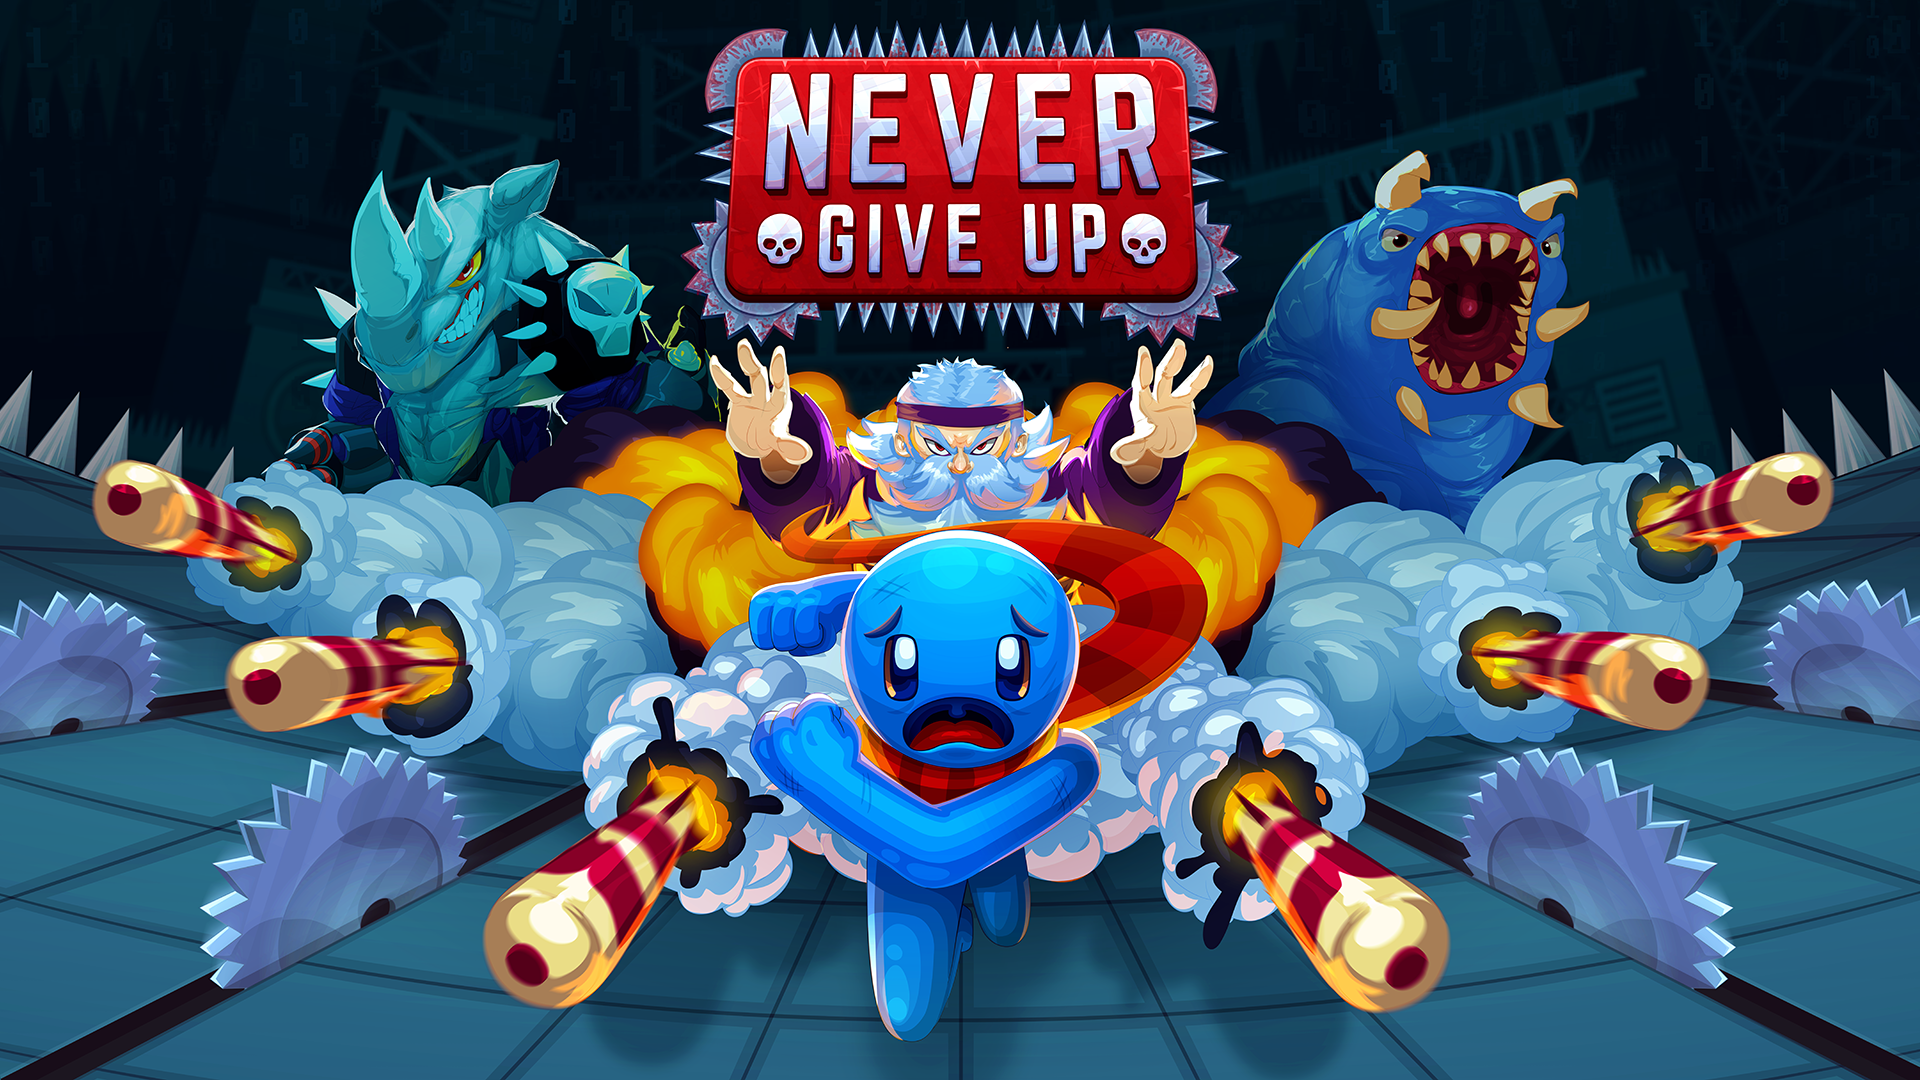 Give your game. Never give up игра. Massive Monster игры. Give it up игра. Never off игра.